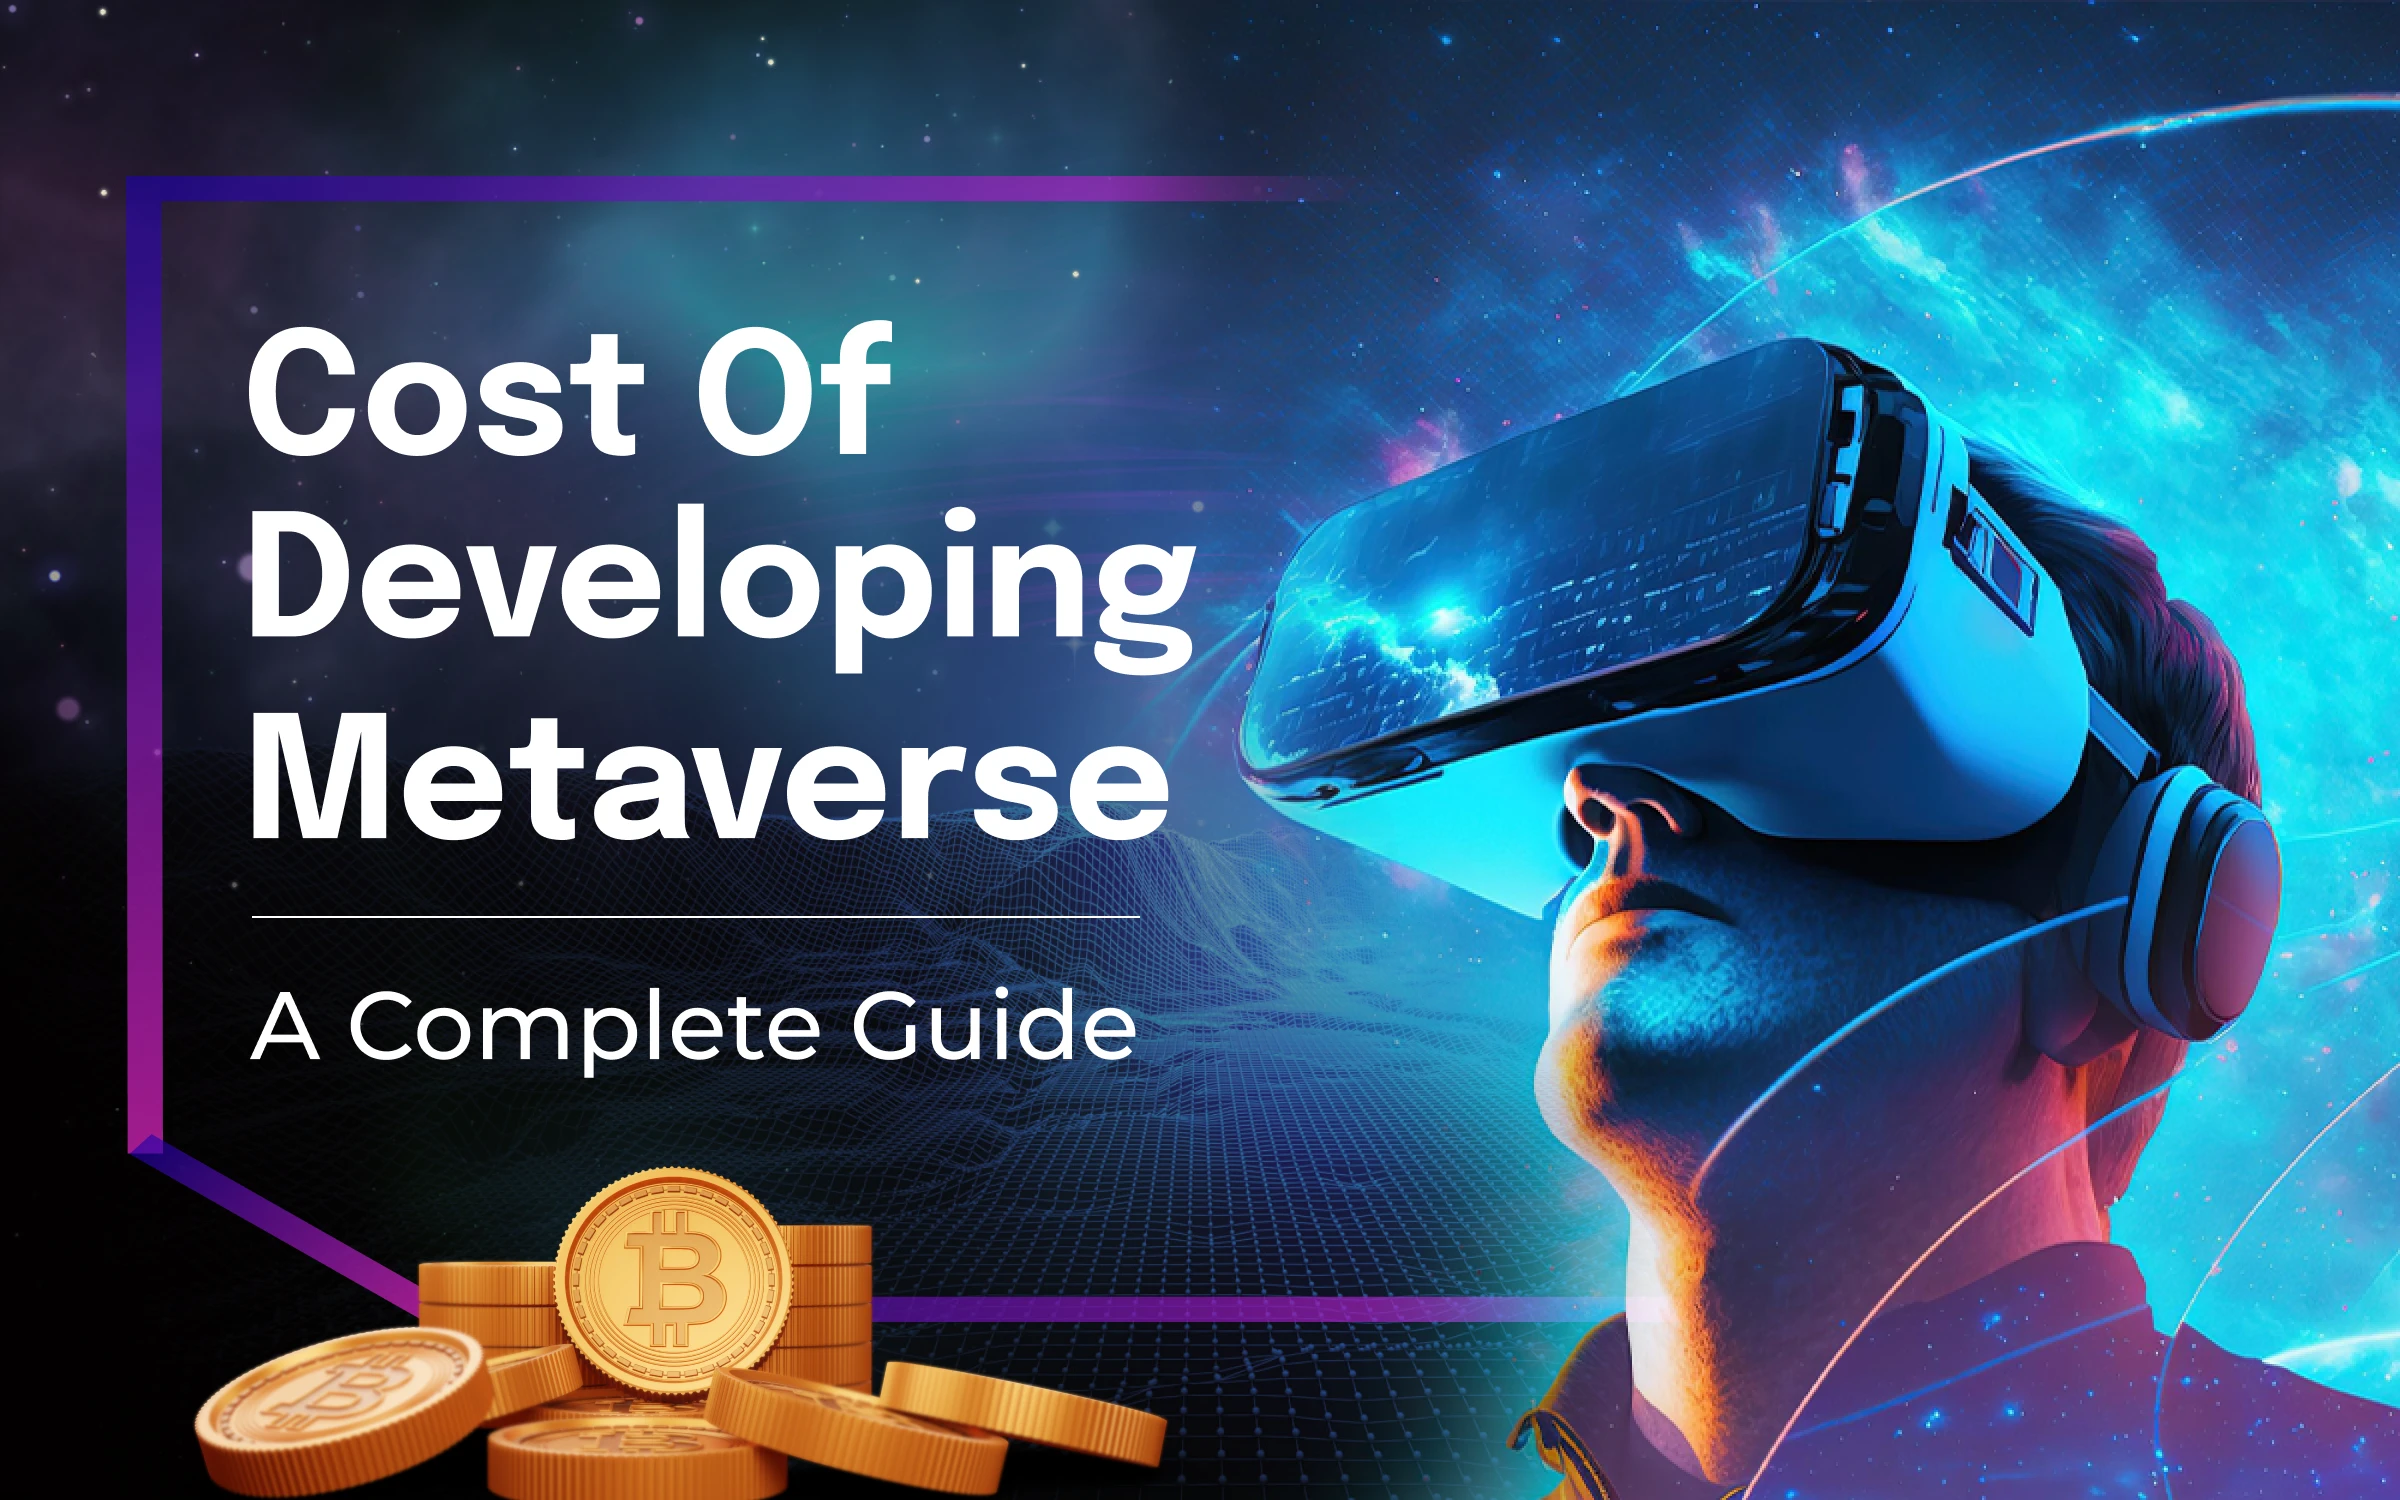 Cost of Developing Metaverse